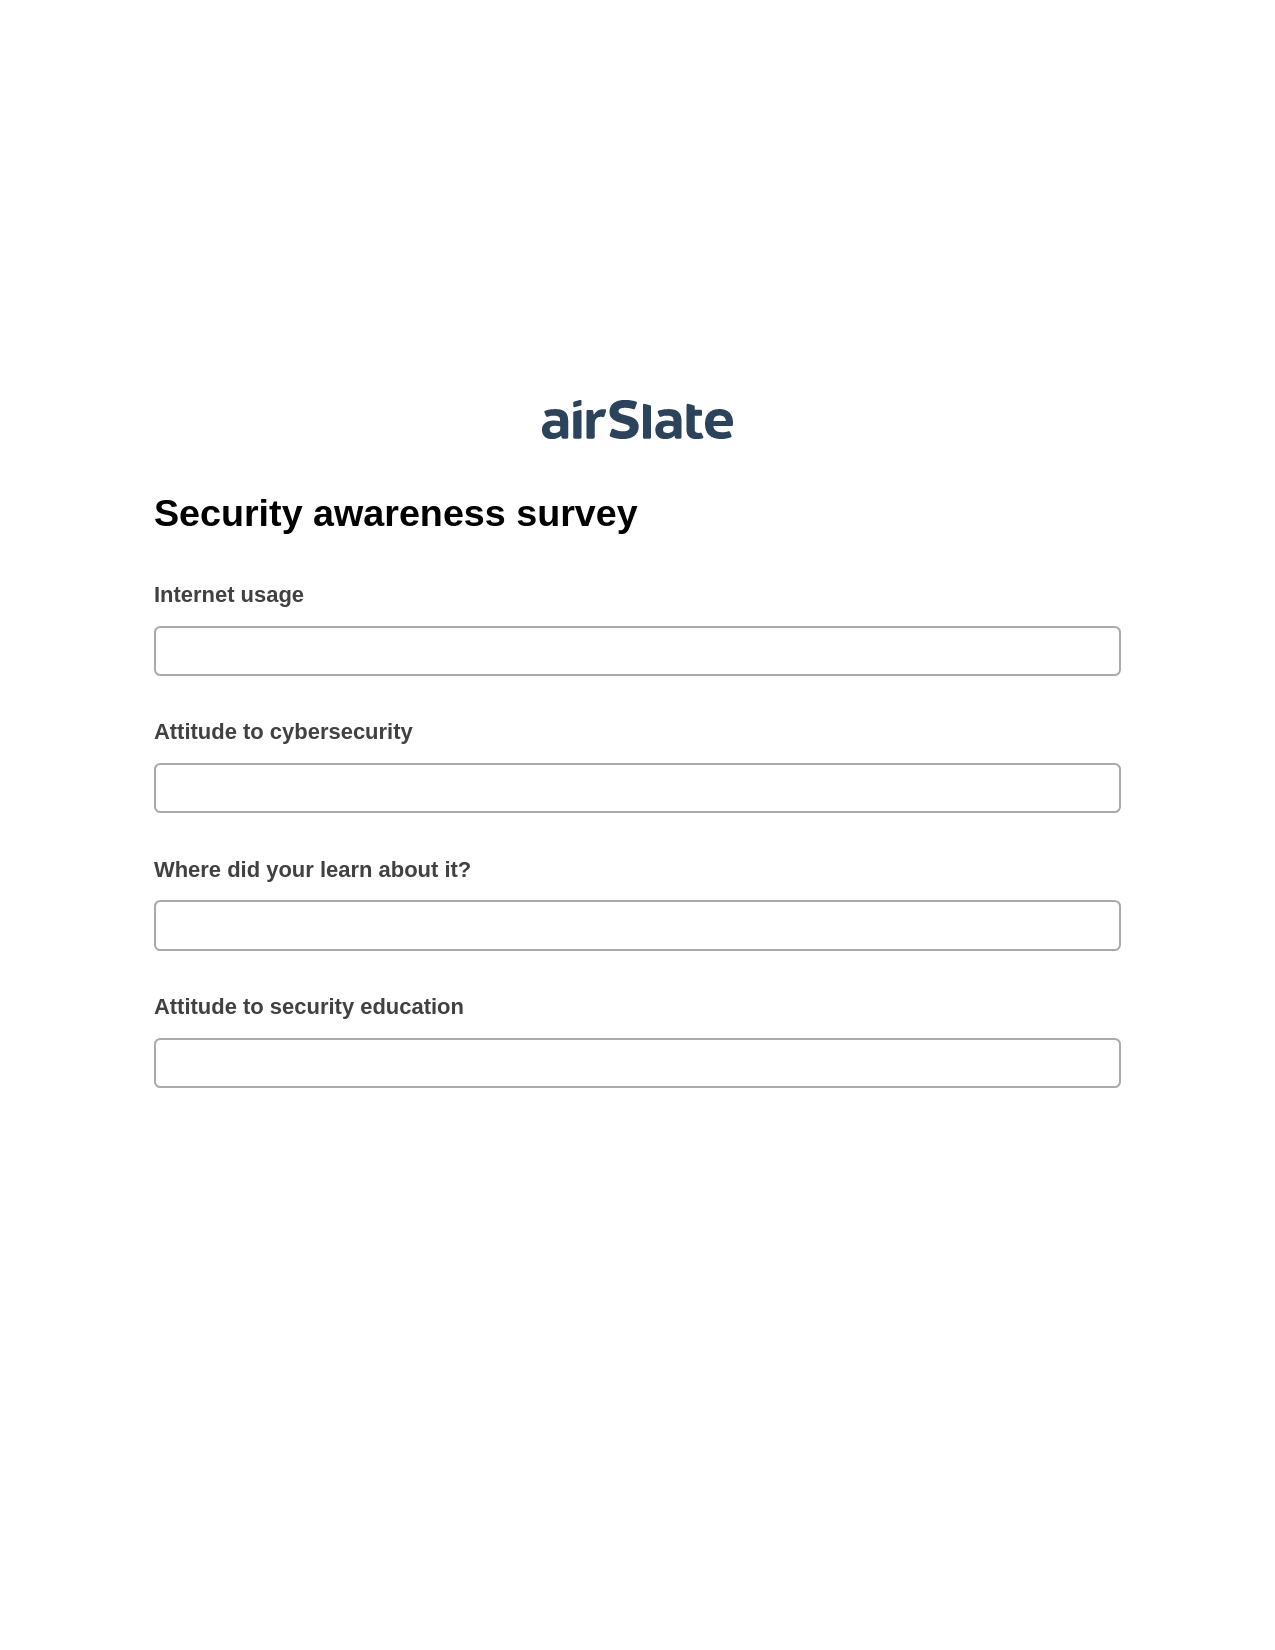 Multirole Security awareness survey Pre-fill Document Bot, In-person Signing Bot, Google Drive Bot